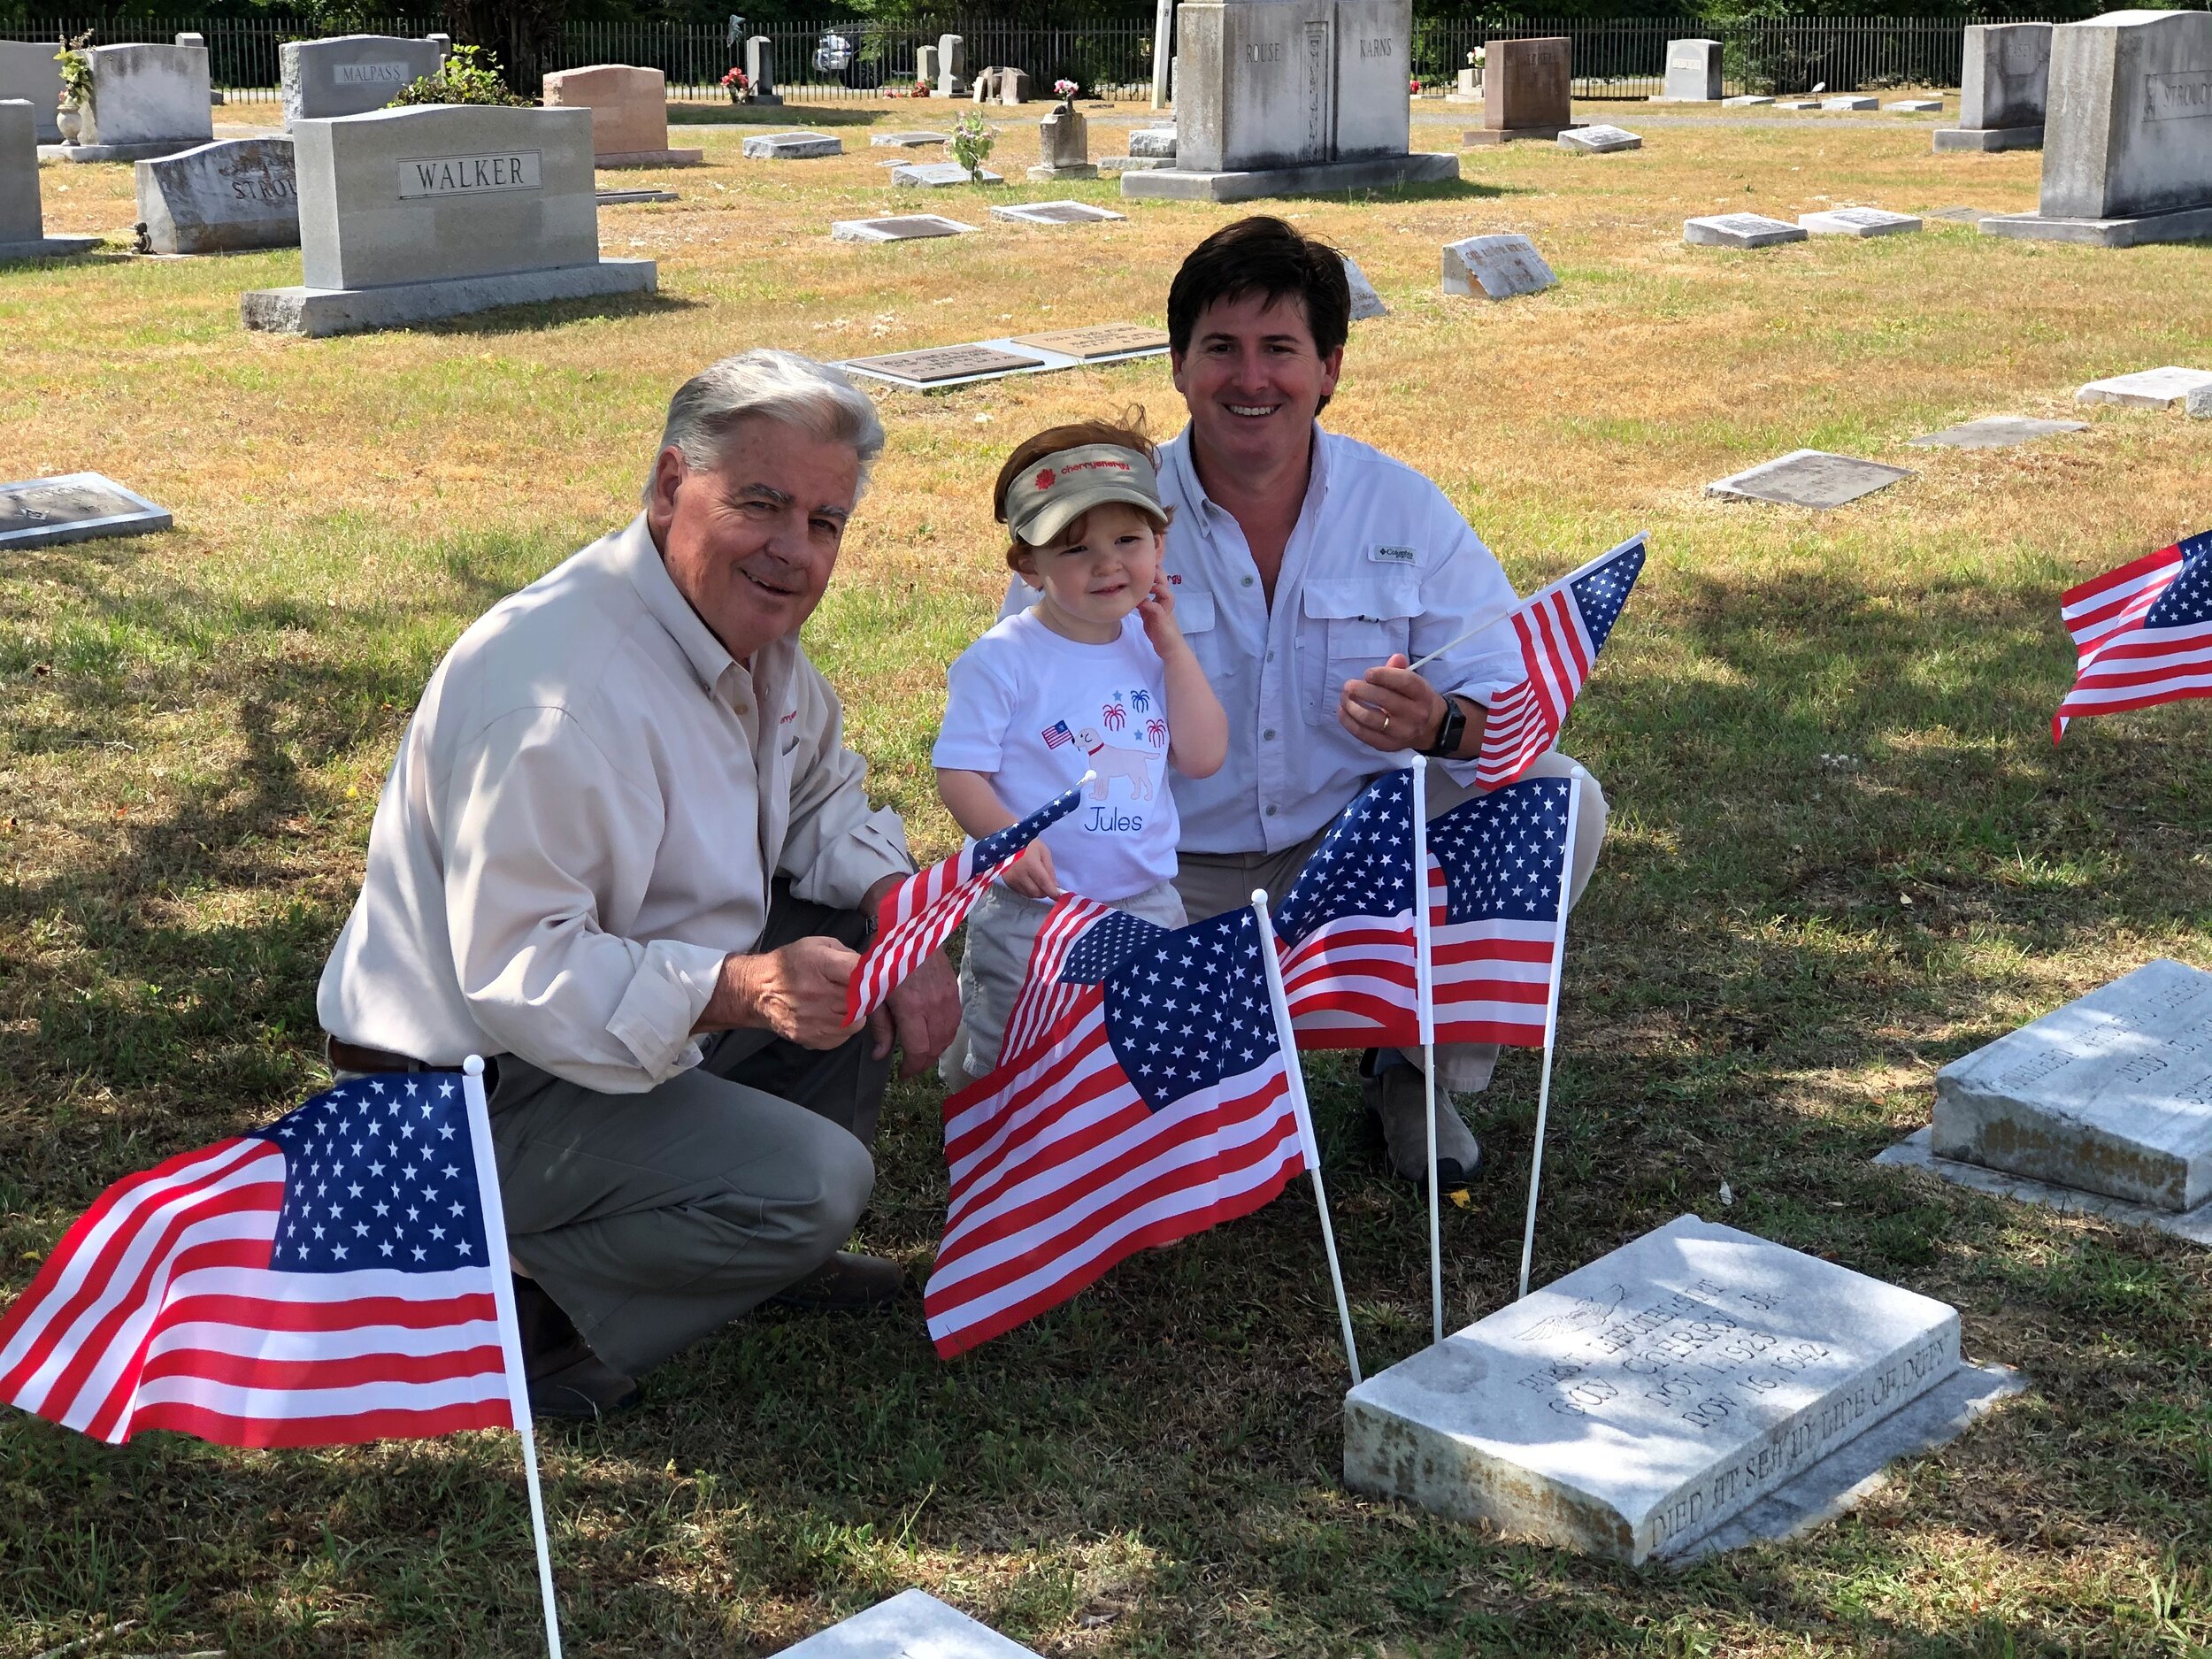 In honor of Memorial Day, Jay, Jason and Jules Cherry pay respect to Guy T. Cherry, Jr. (Cherry Oil founder’s son), who served in the Civil Air Patrol and died at sea in 1942, while serving our great country.